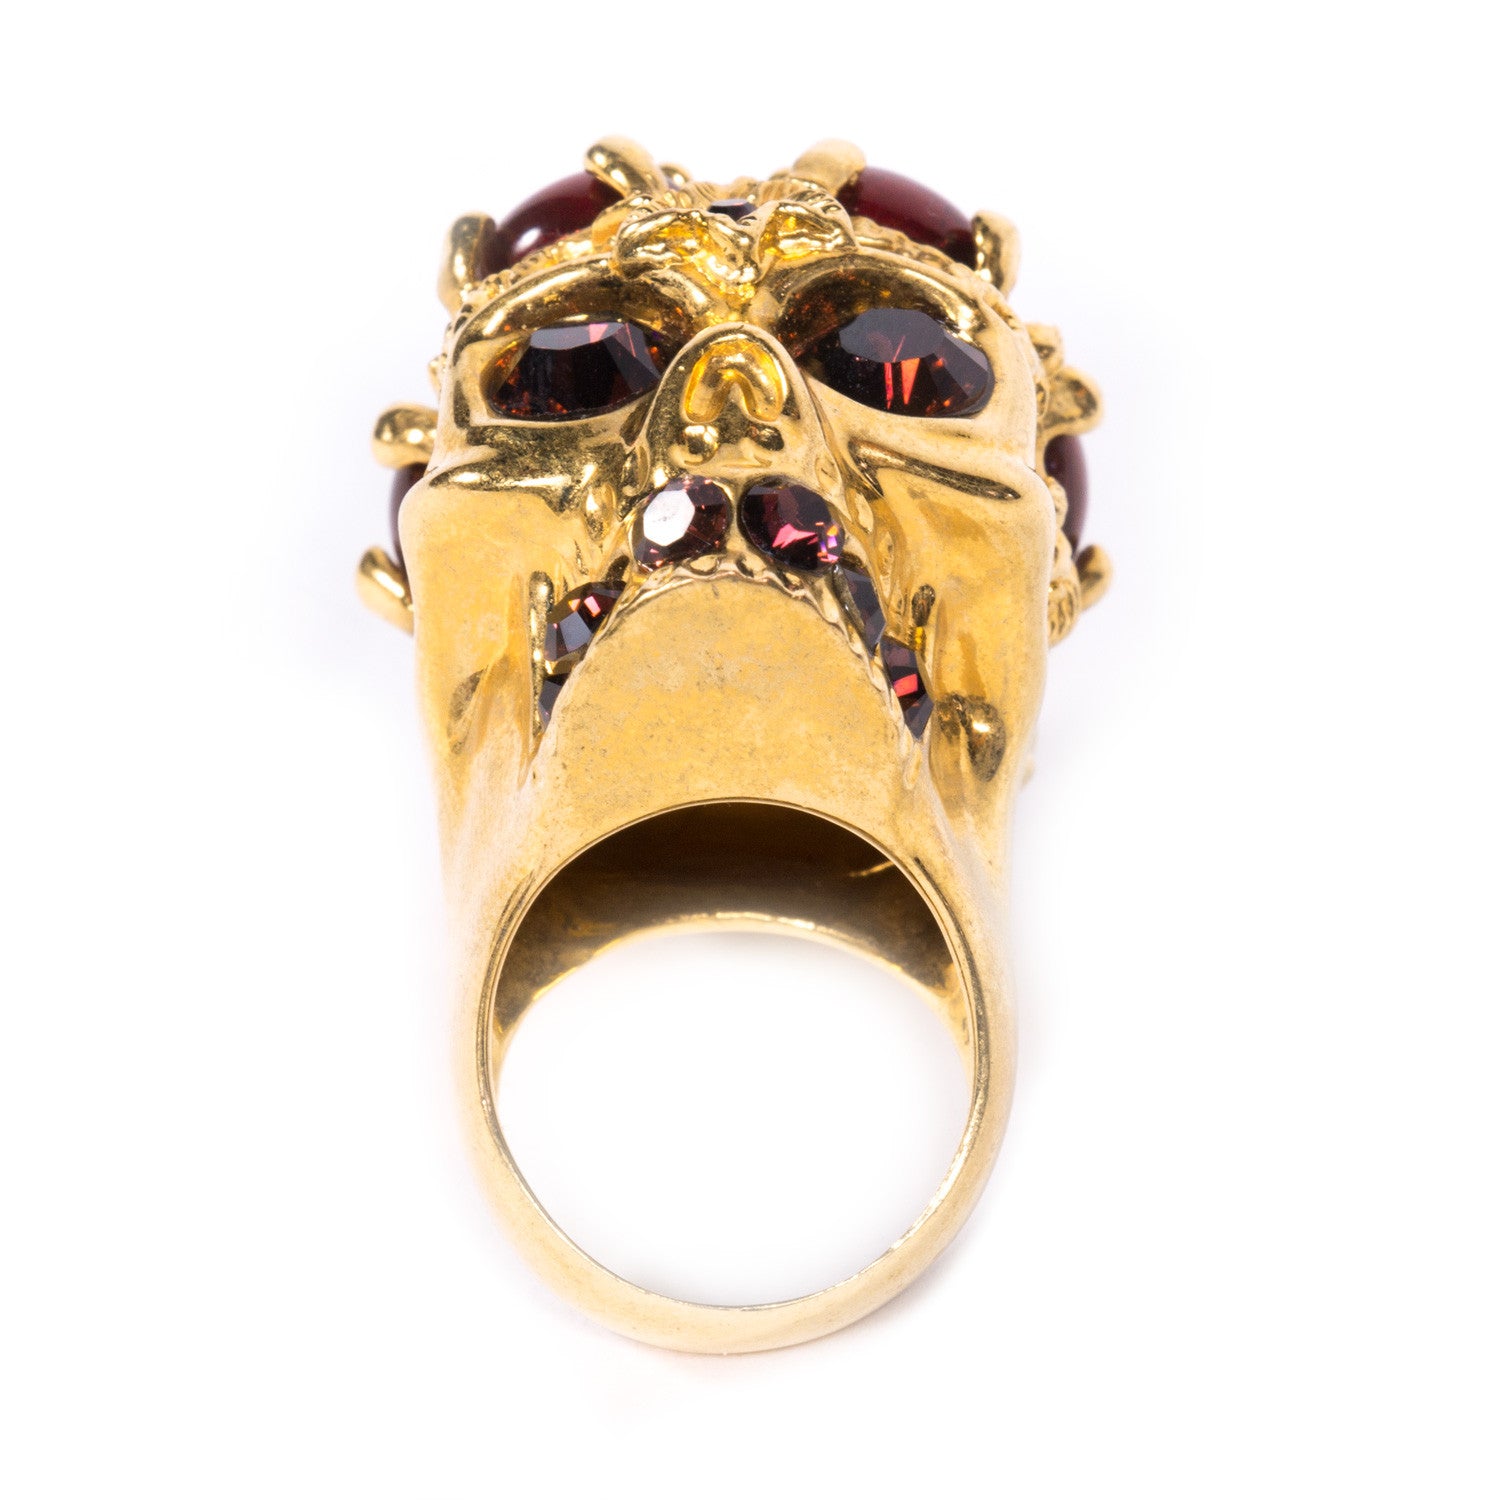 Shop authentic Alexander McQueen Skull Ring at revogue for just USD 209.00